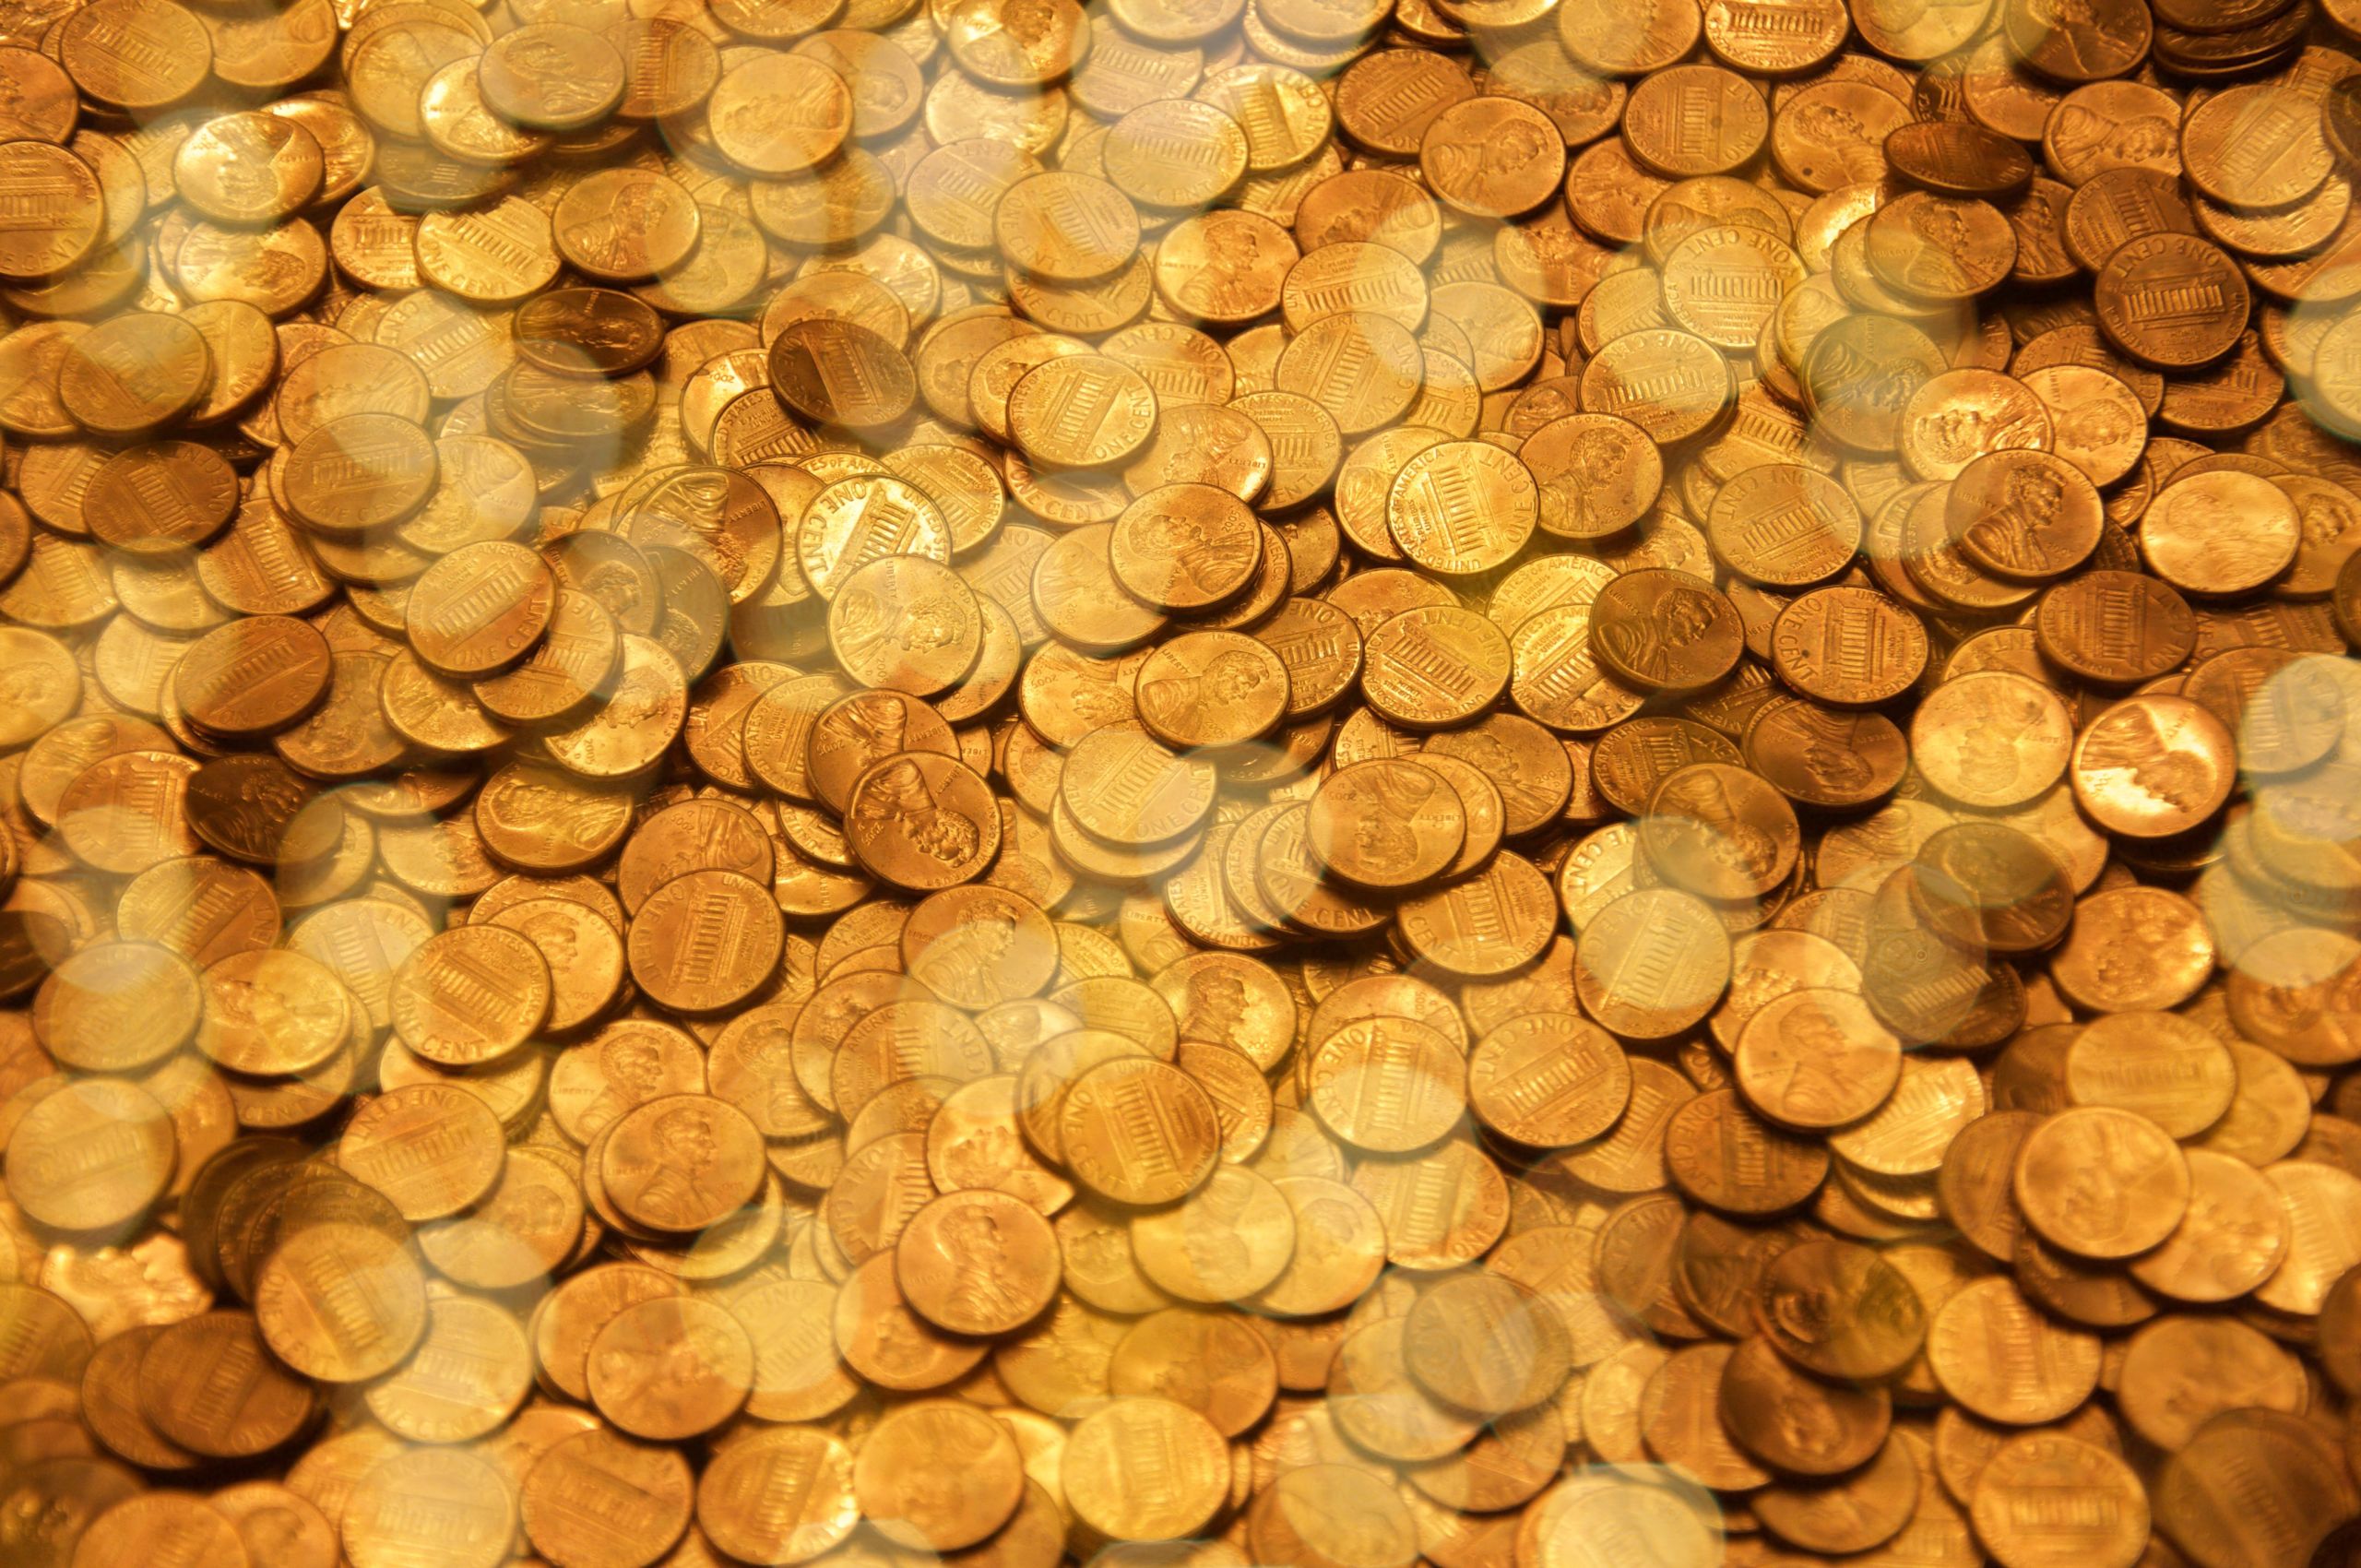 A pile of gold coins, representing the riches one might earn from content monetization